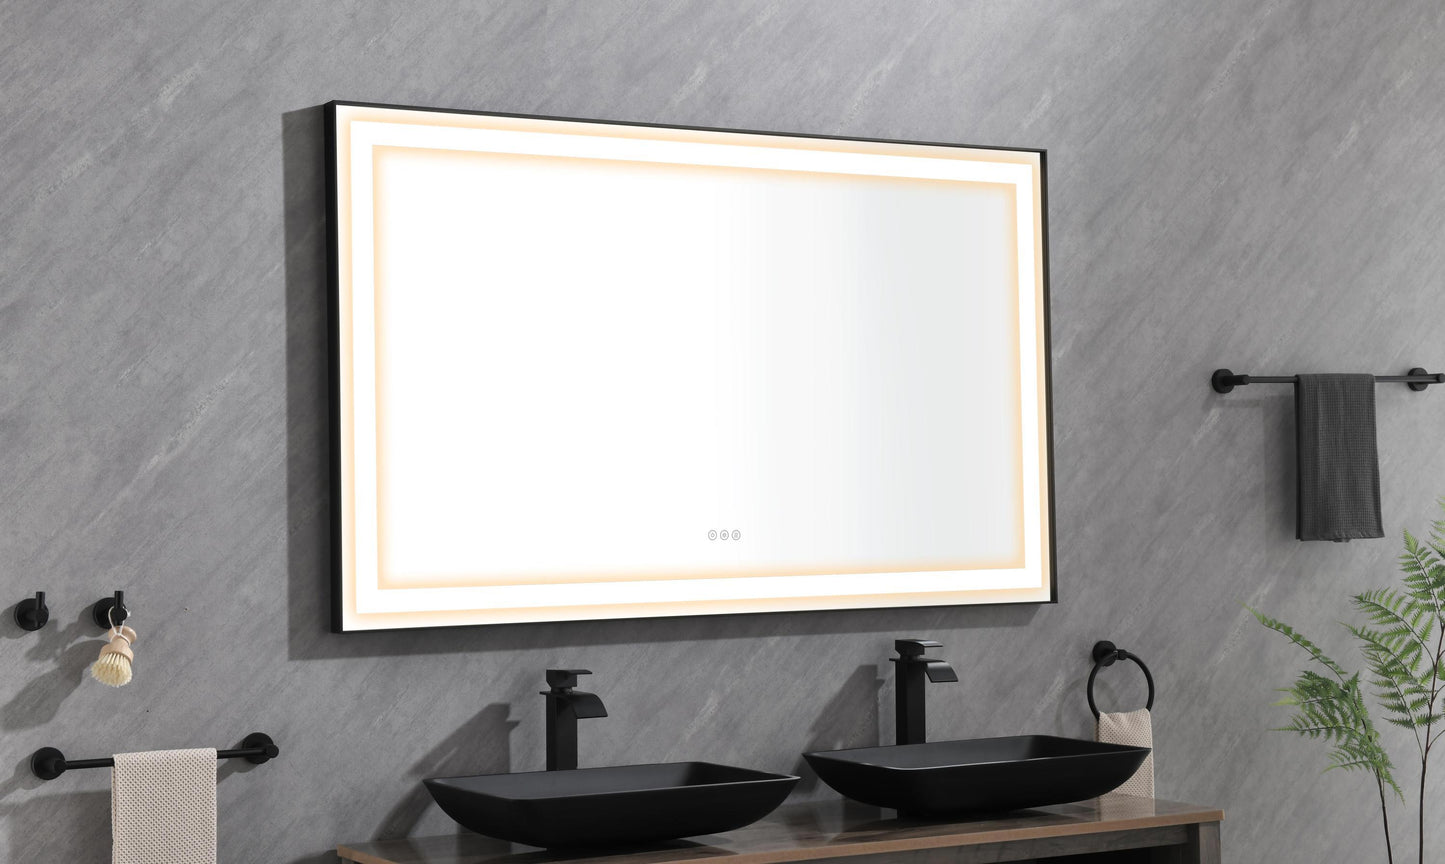 72*48 LED Lighted Bathroom Wall Mounted Mirror with High Lumen+Anti-Fog Separately Control